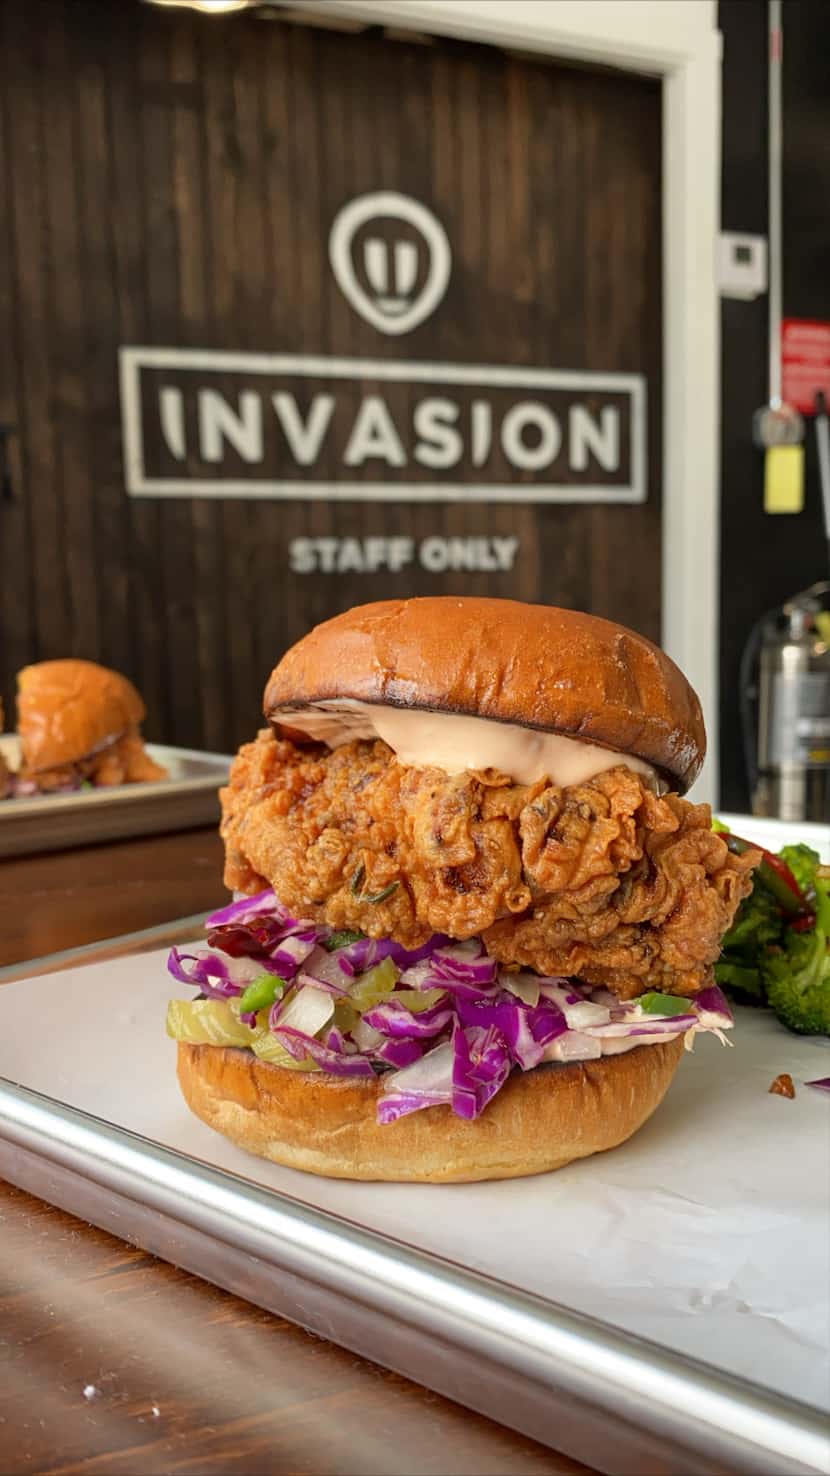 The famous Cardi B chicken sandwich at Invasion restaurant in East Dallas.